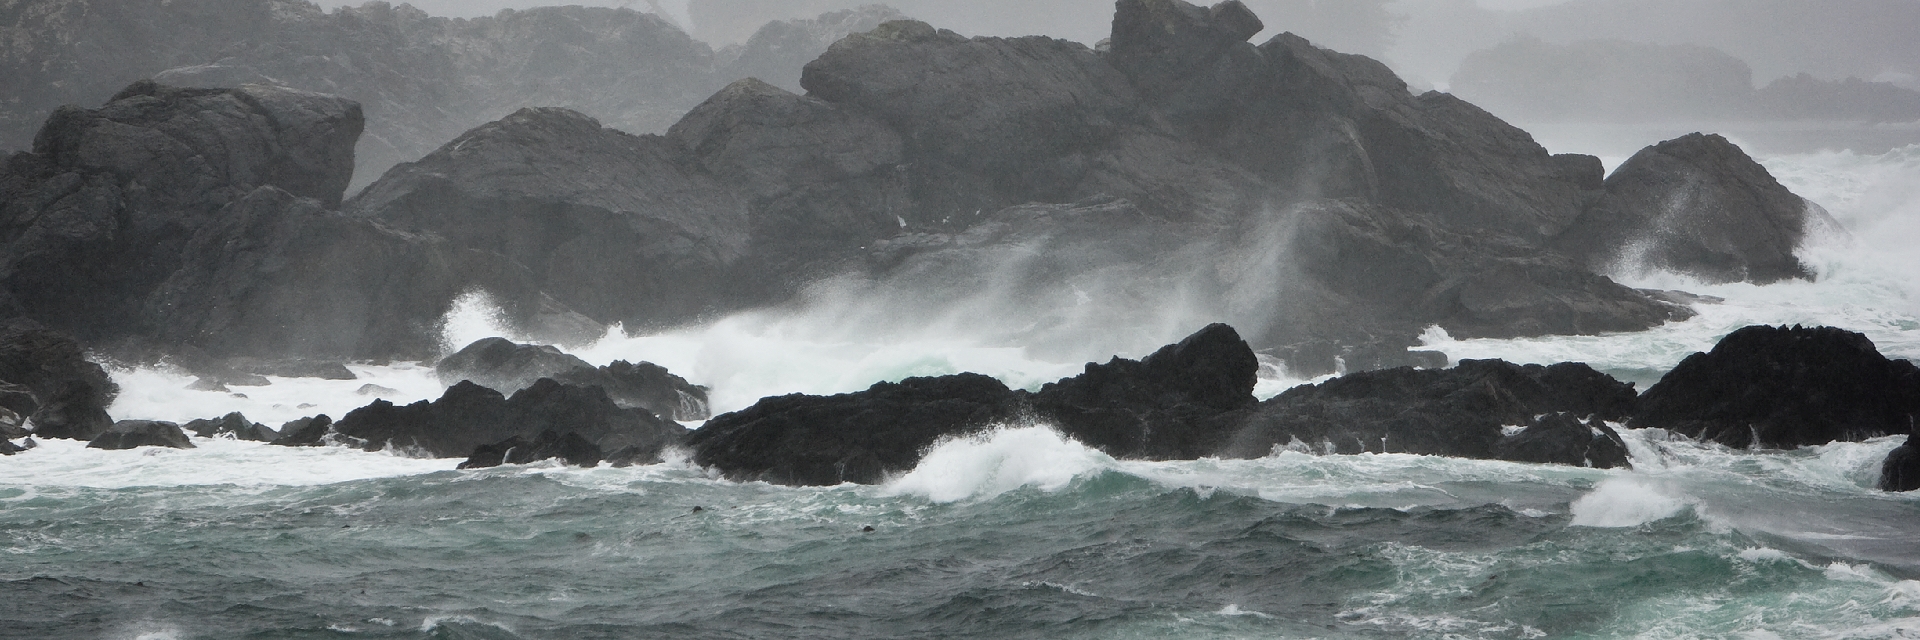 Pounding storm surge meets immovable rock outcroppings on Ucluelet's Wild Pacific Trail